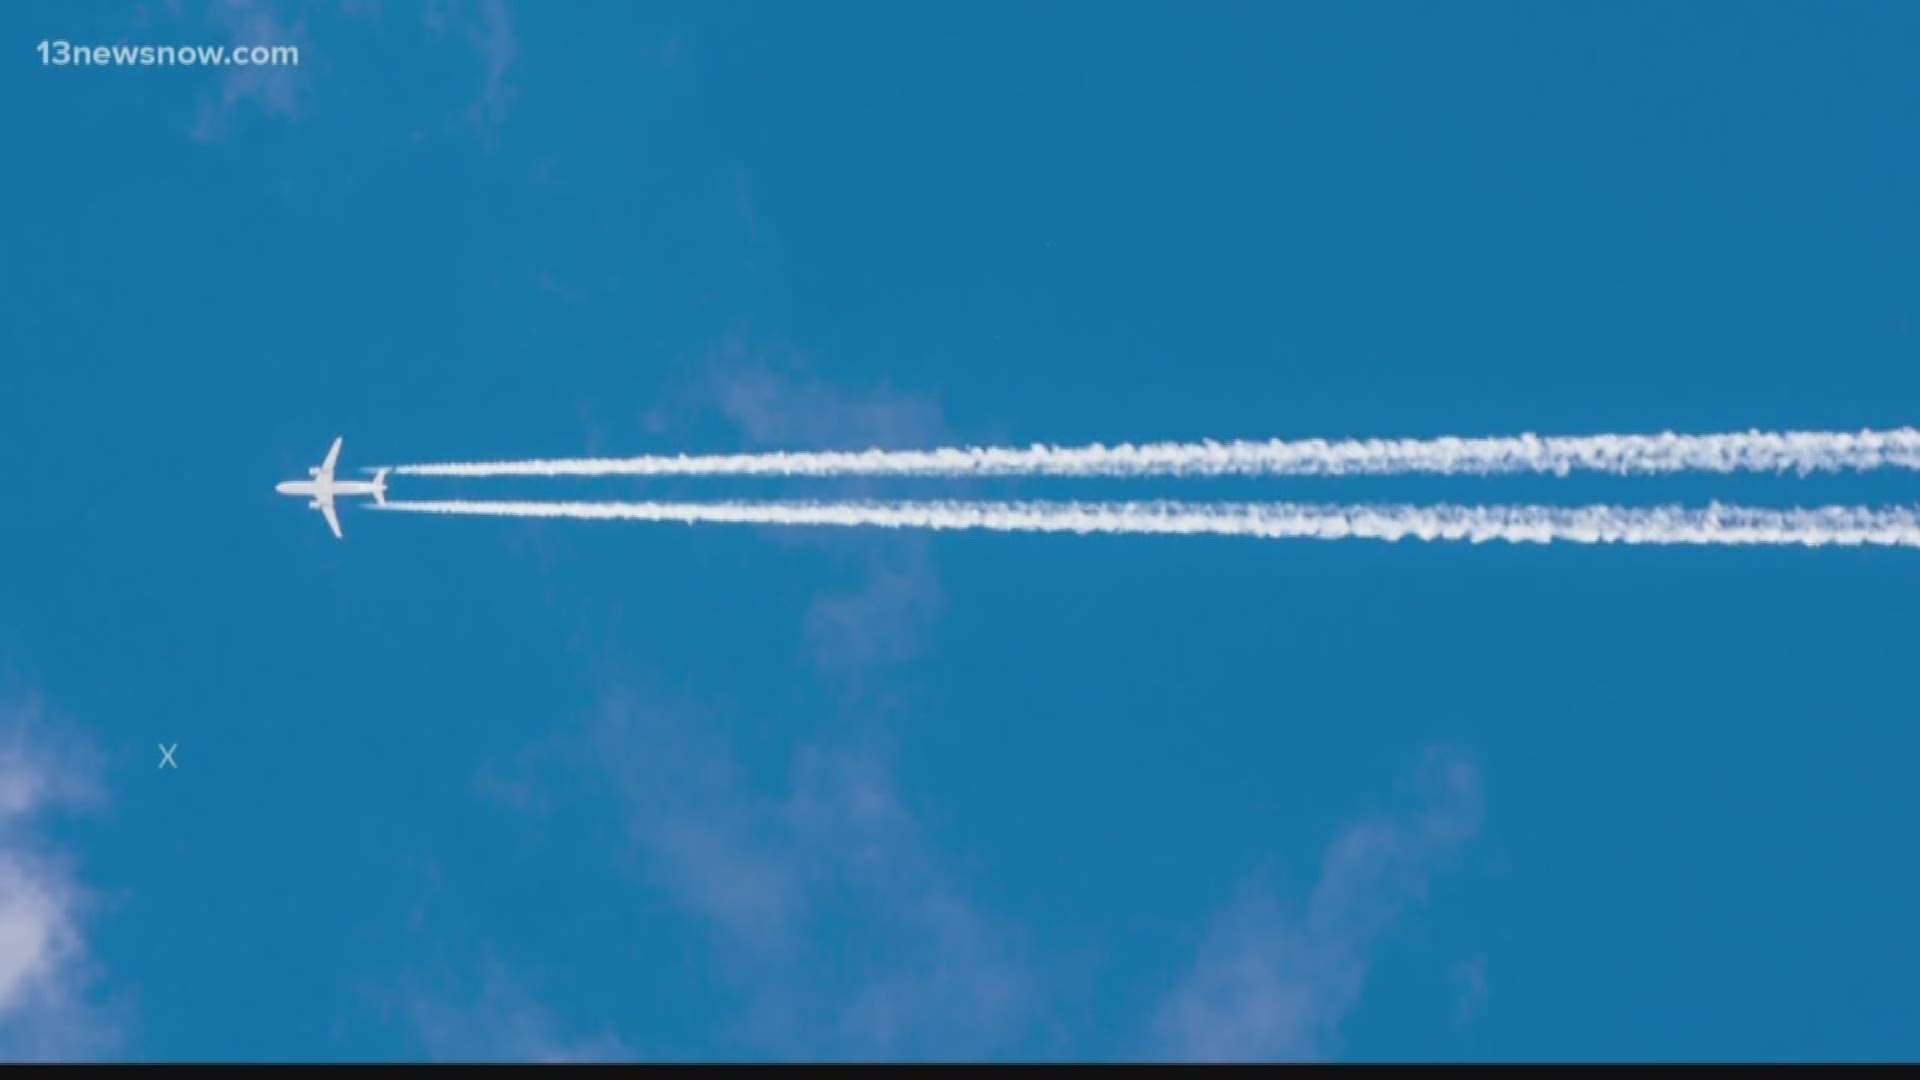 The chemtrails theory has gained popularity due to social media. We're verifying whether there's any truth to this theory.